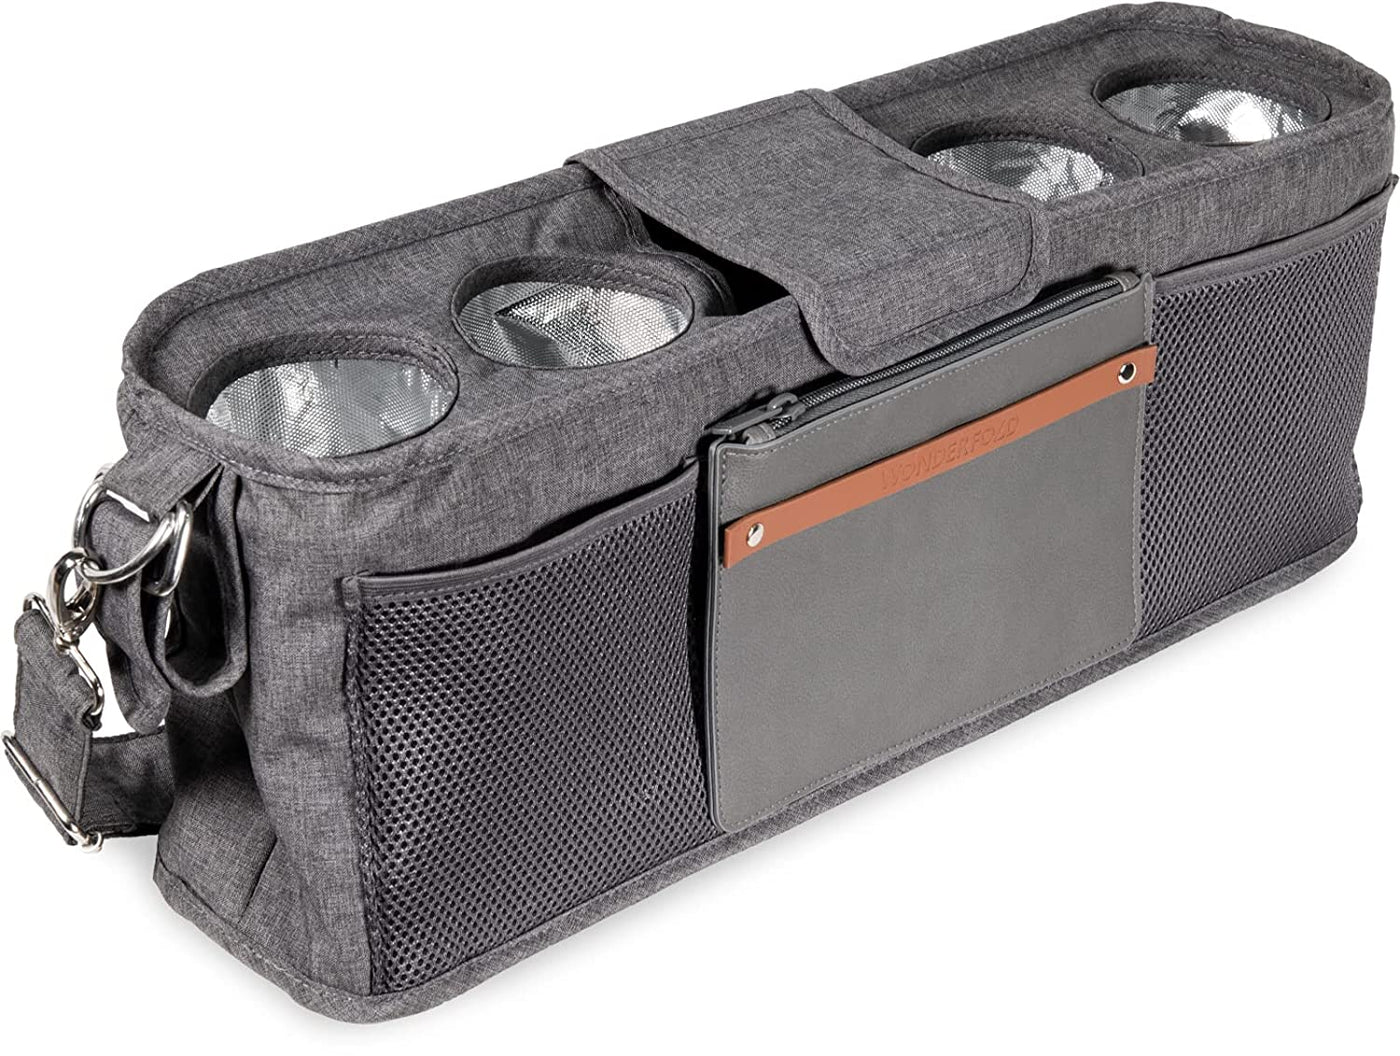 Parent Console with 4 Insulated Cup Holders